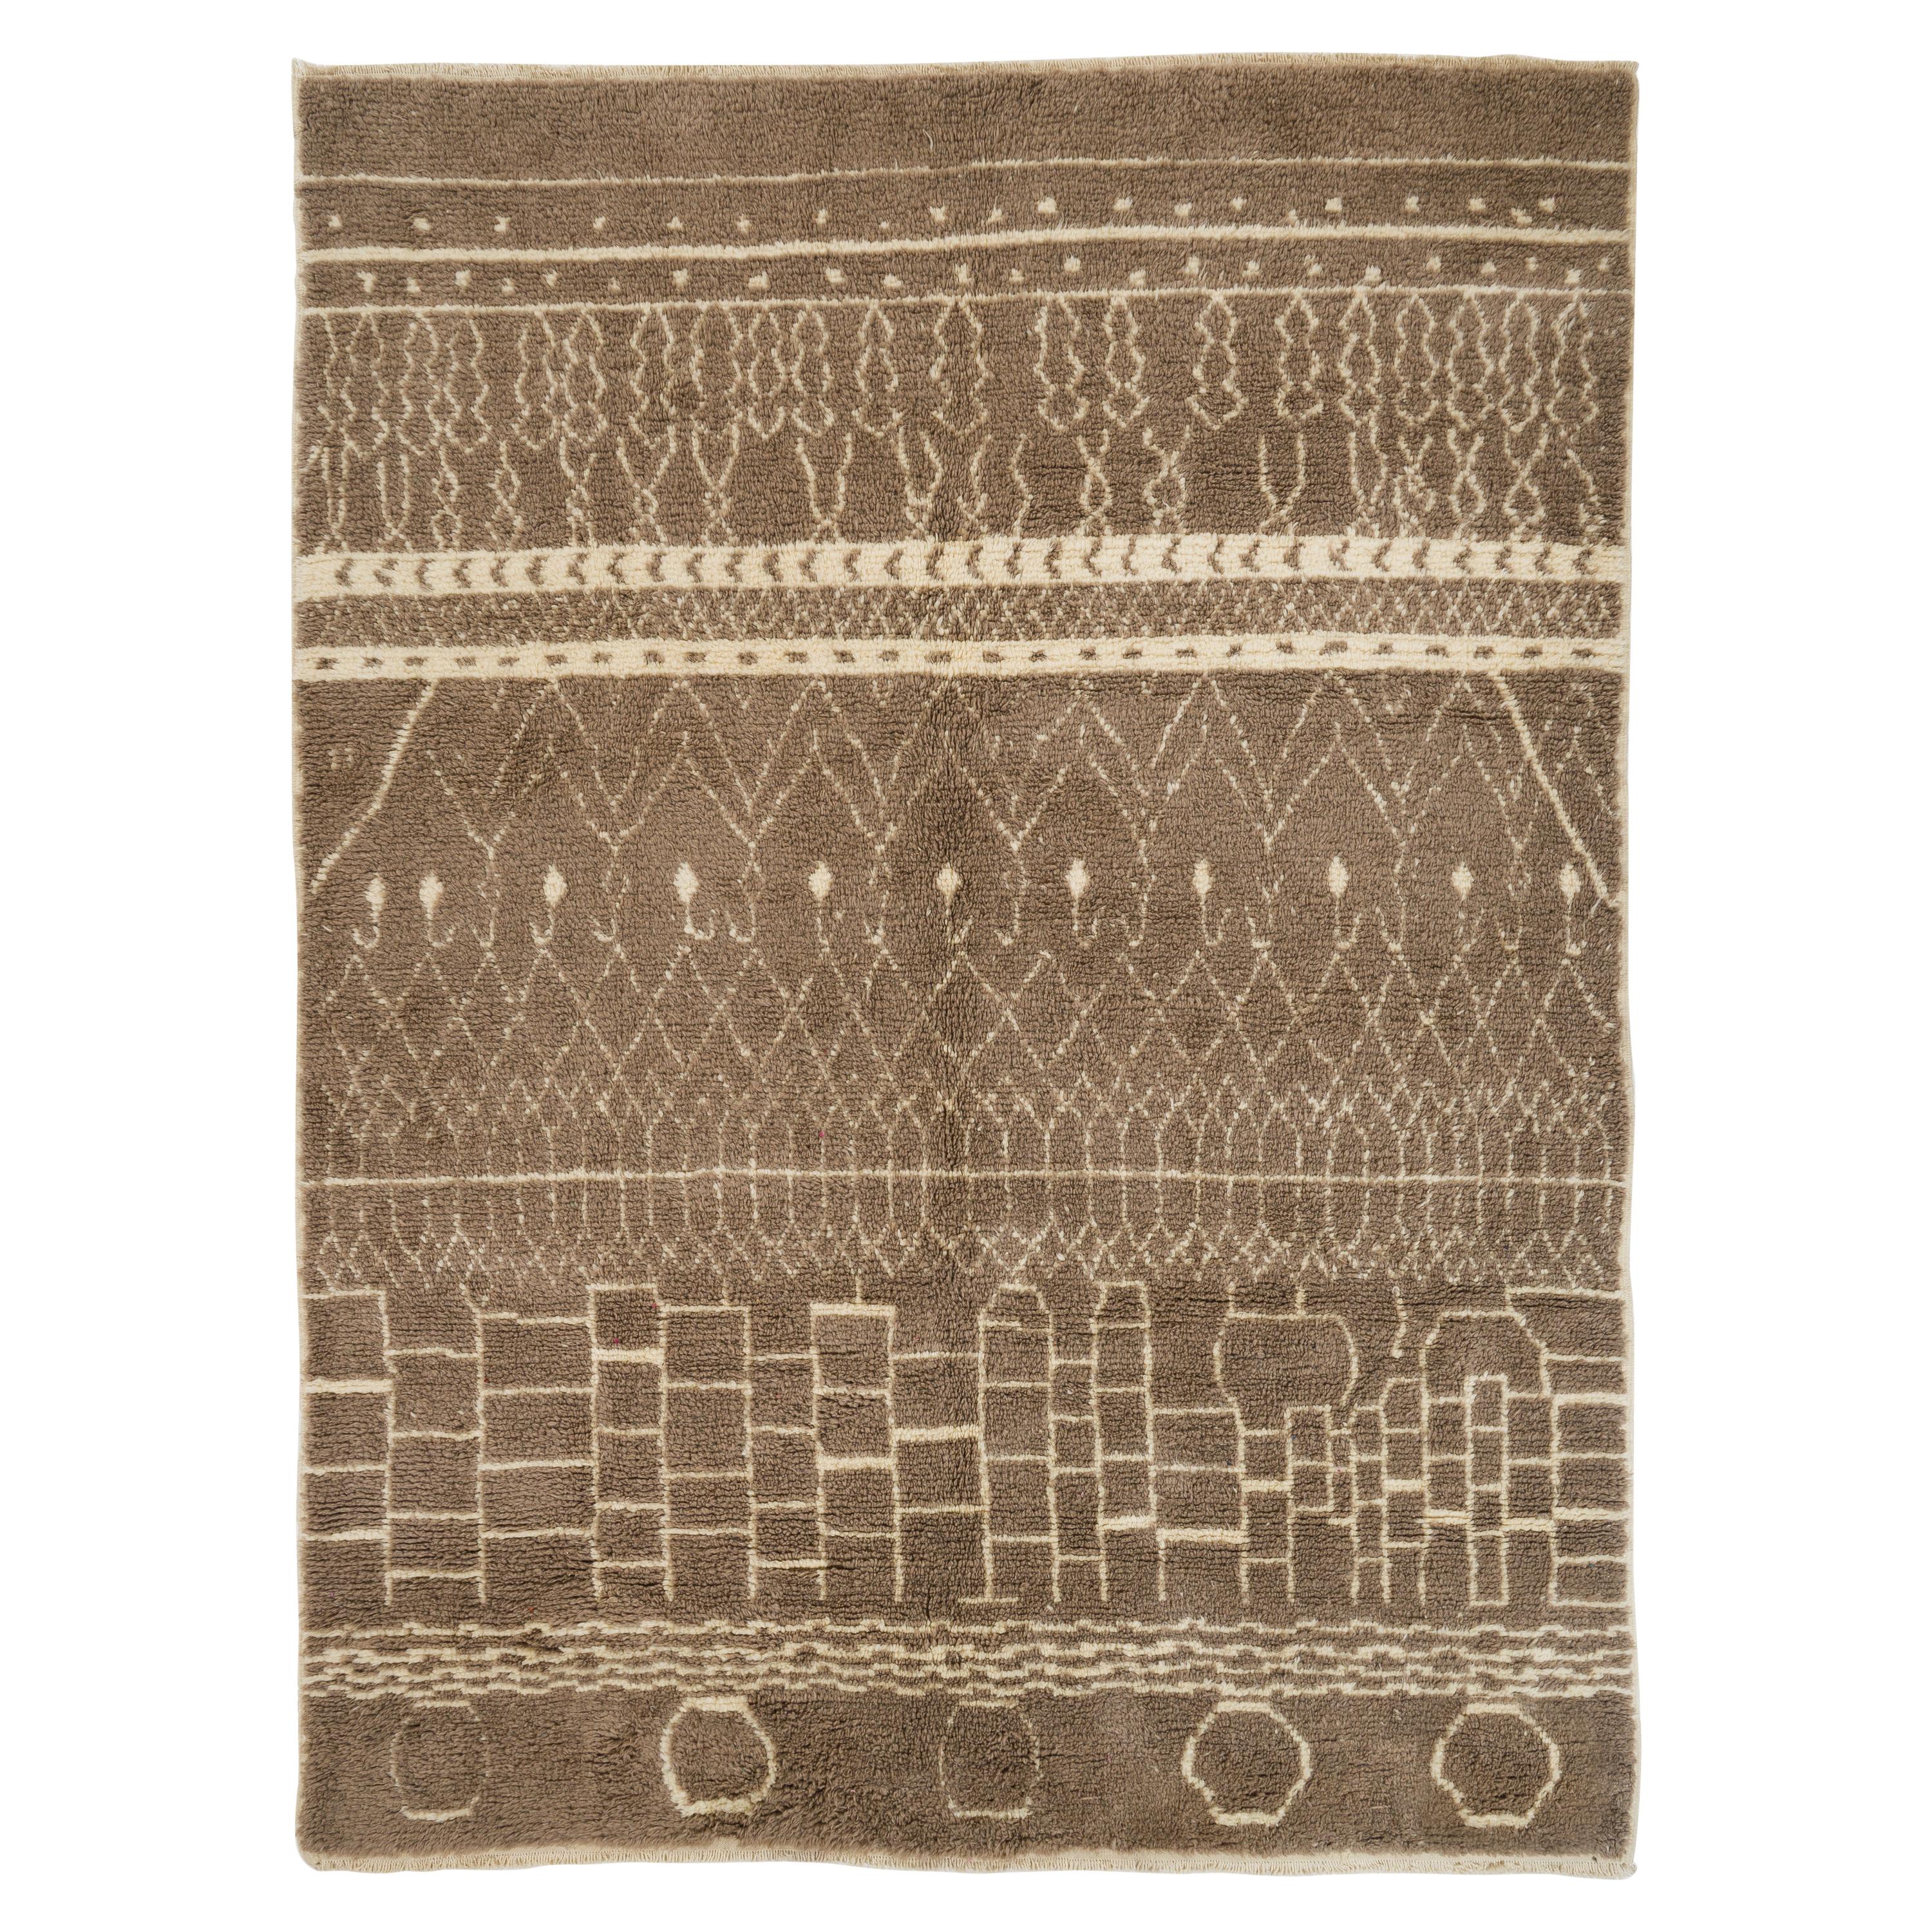 Moroccan Beni Ourain Rug, 100% Natural Undyed Wool